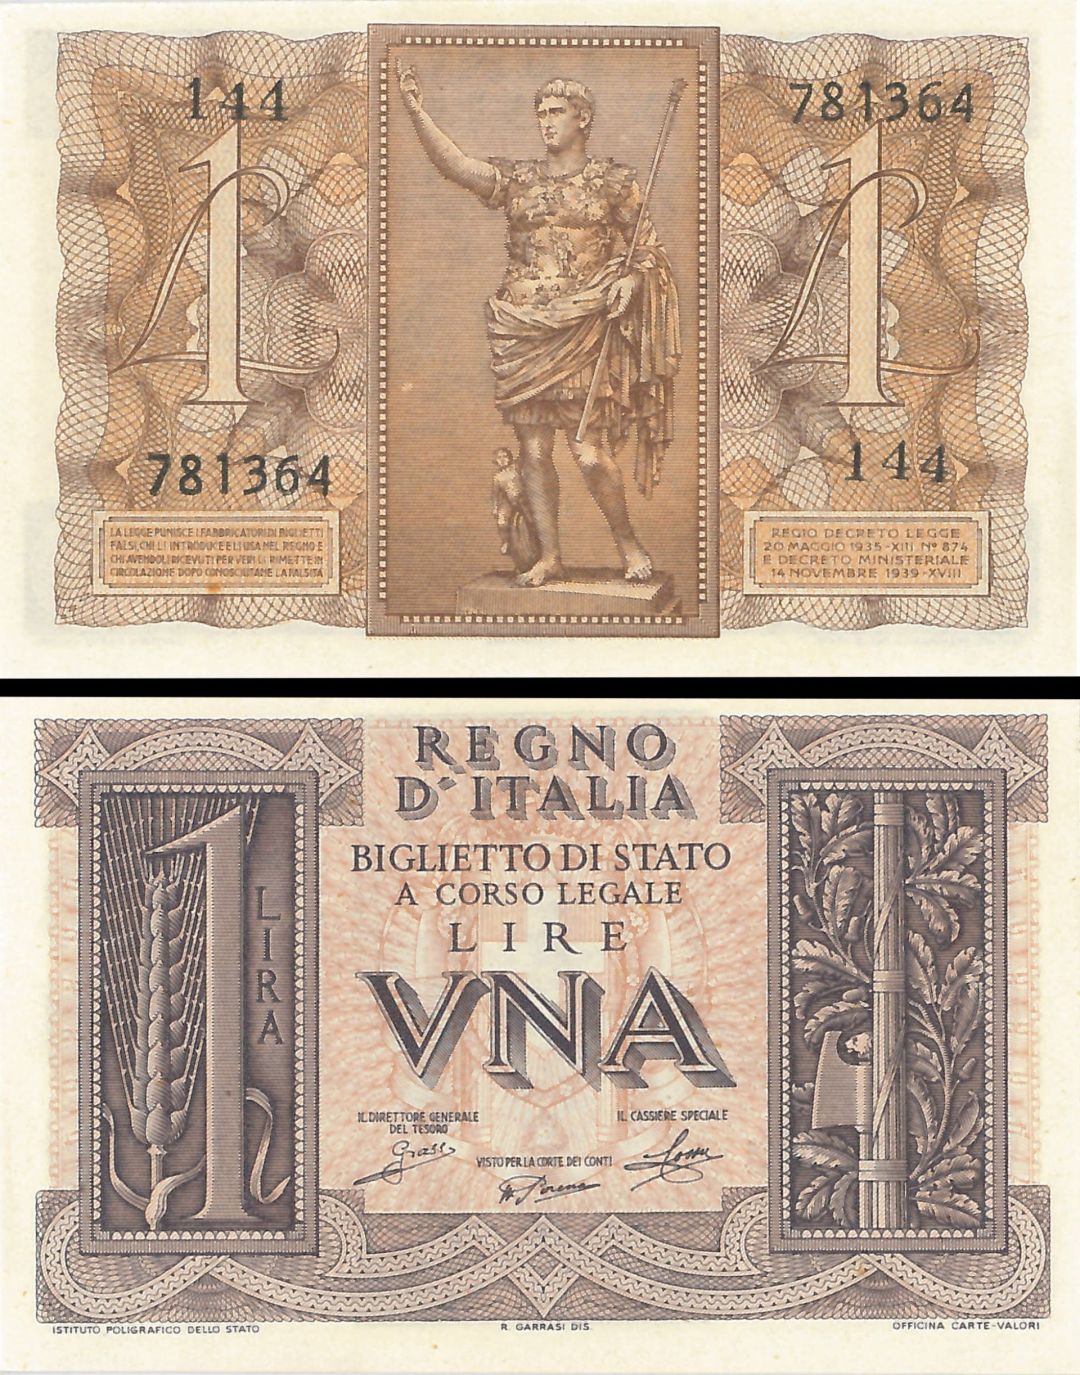 Italy - 1 Italian Lire Banknote - P-26 - 1939 dated Foreign Paper Money